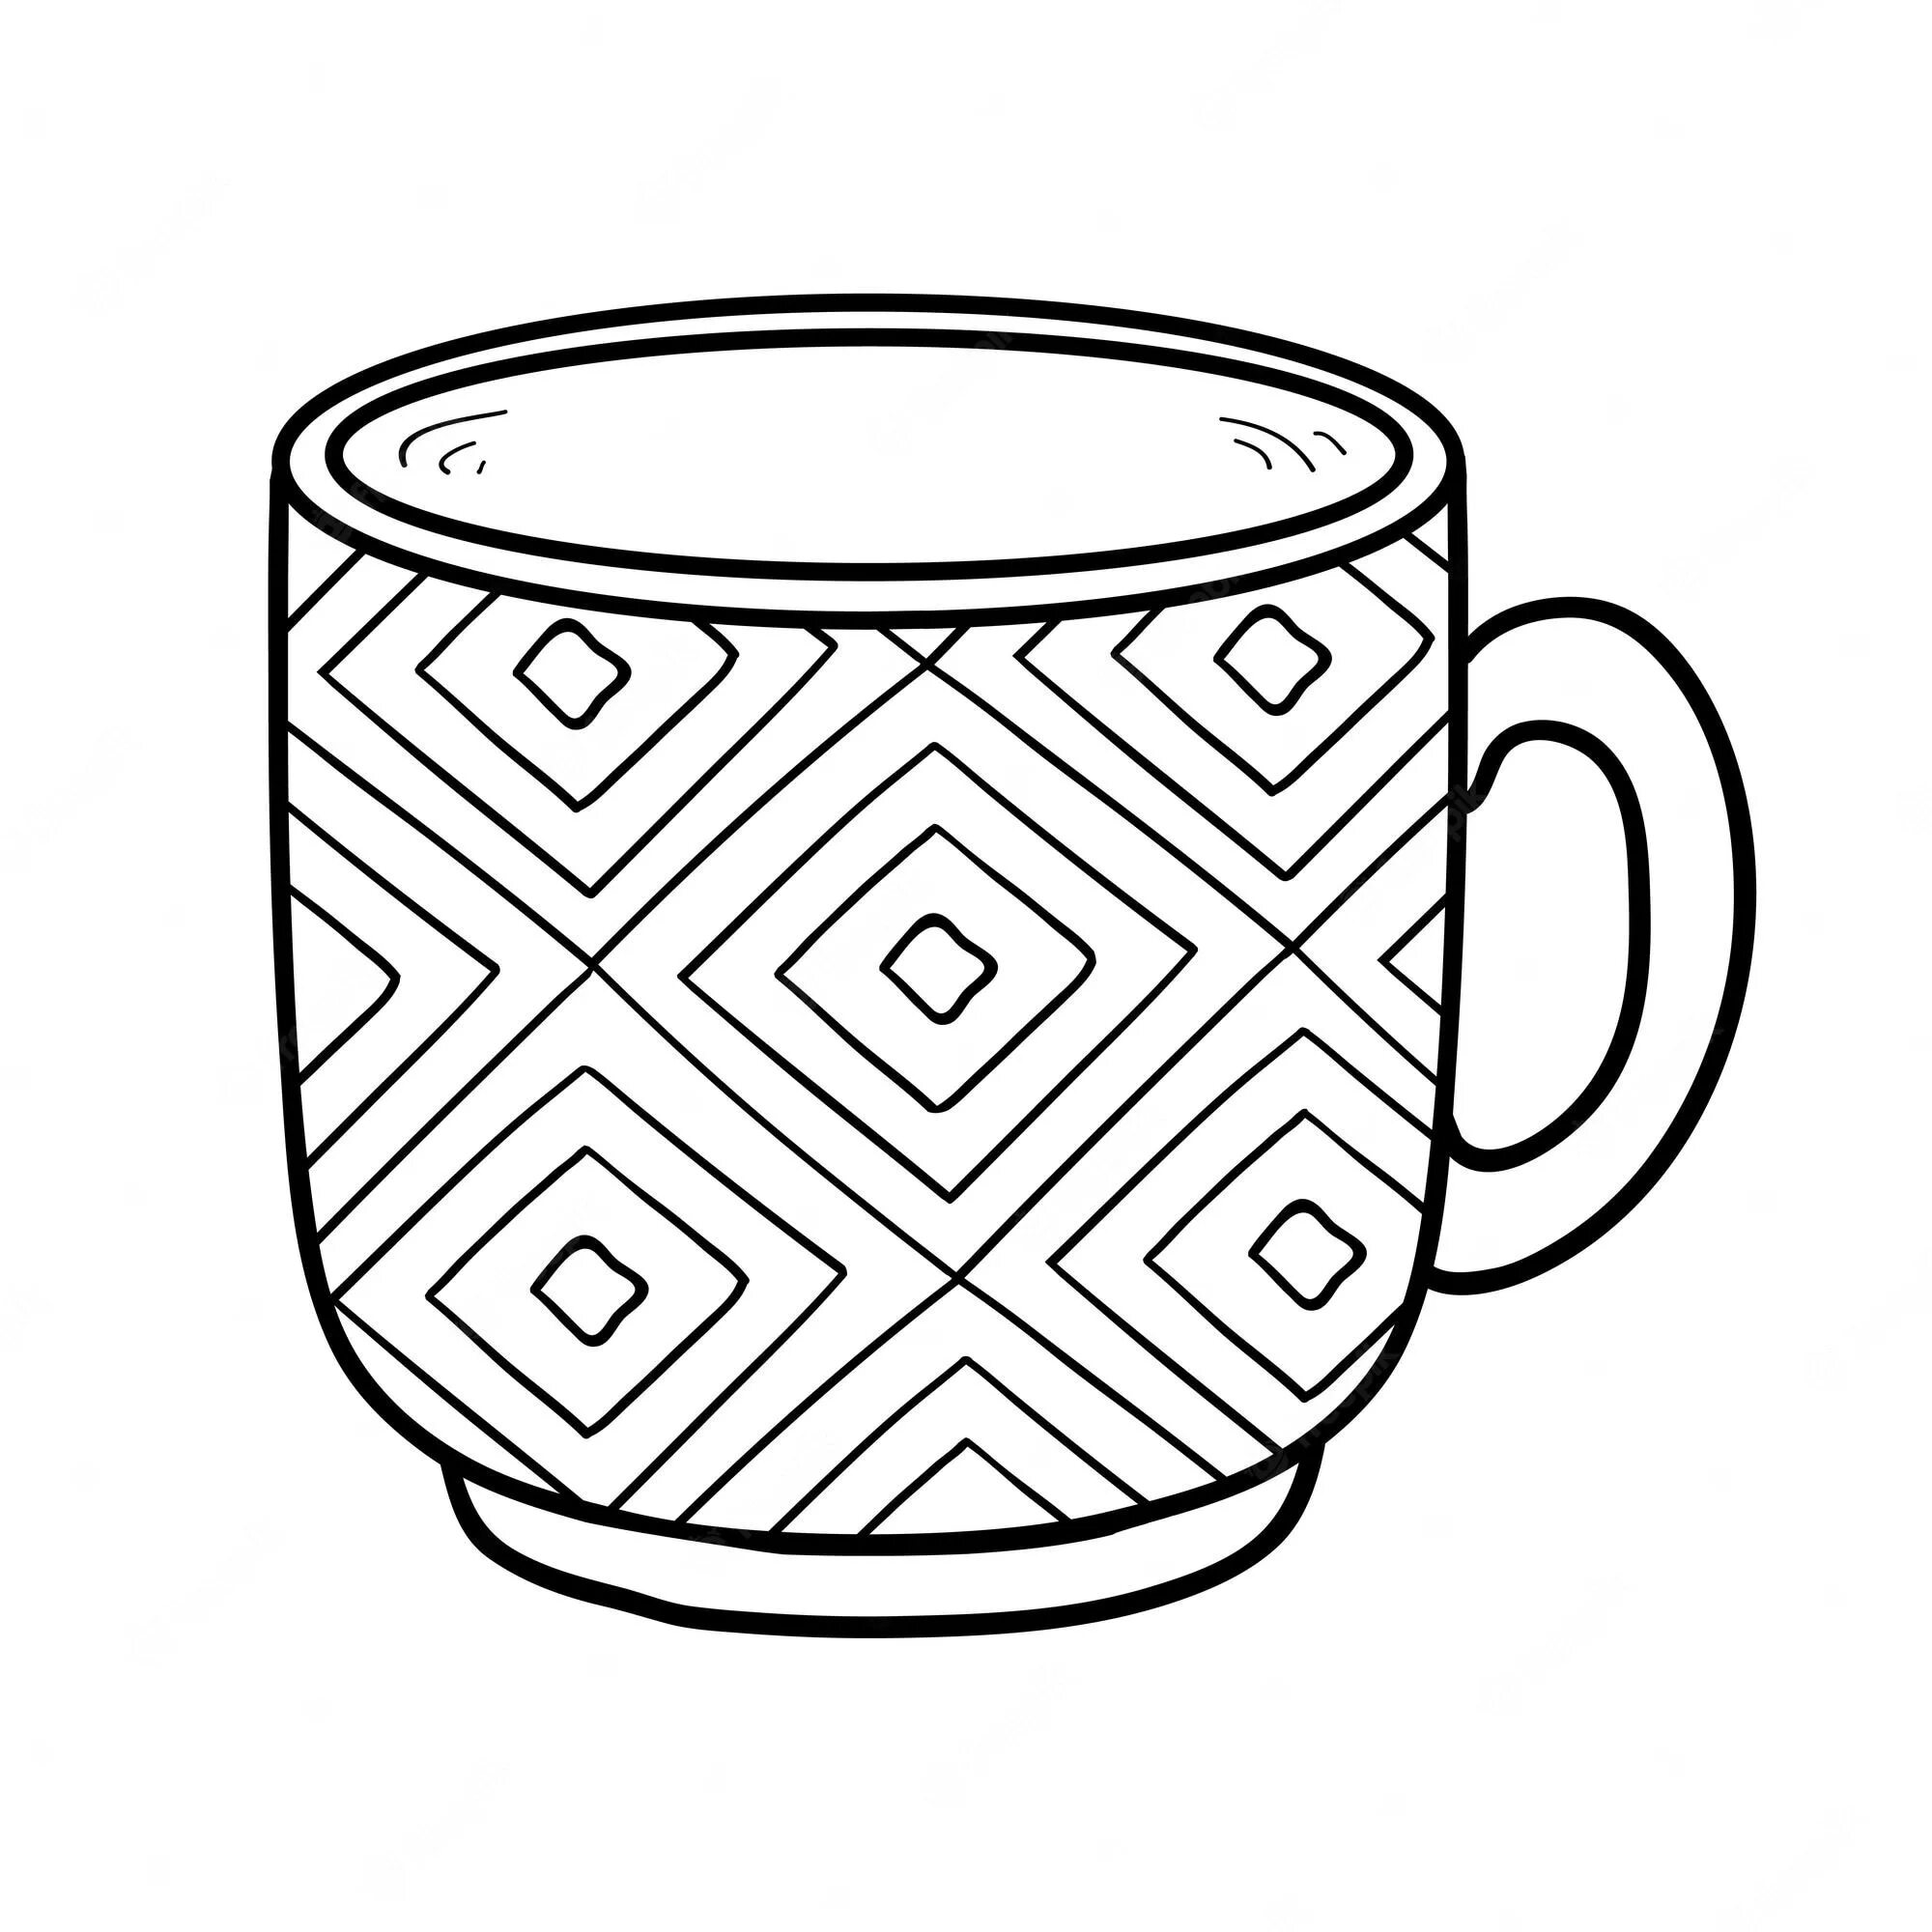 Whimsical coloring cup for kids